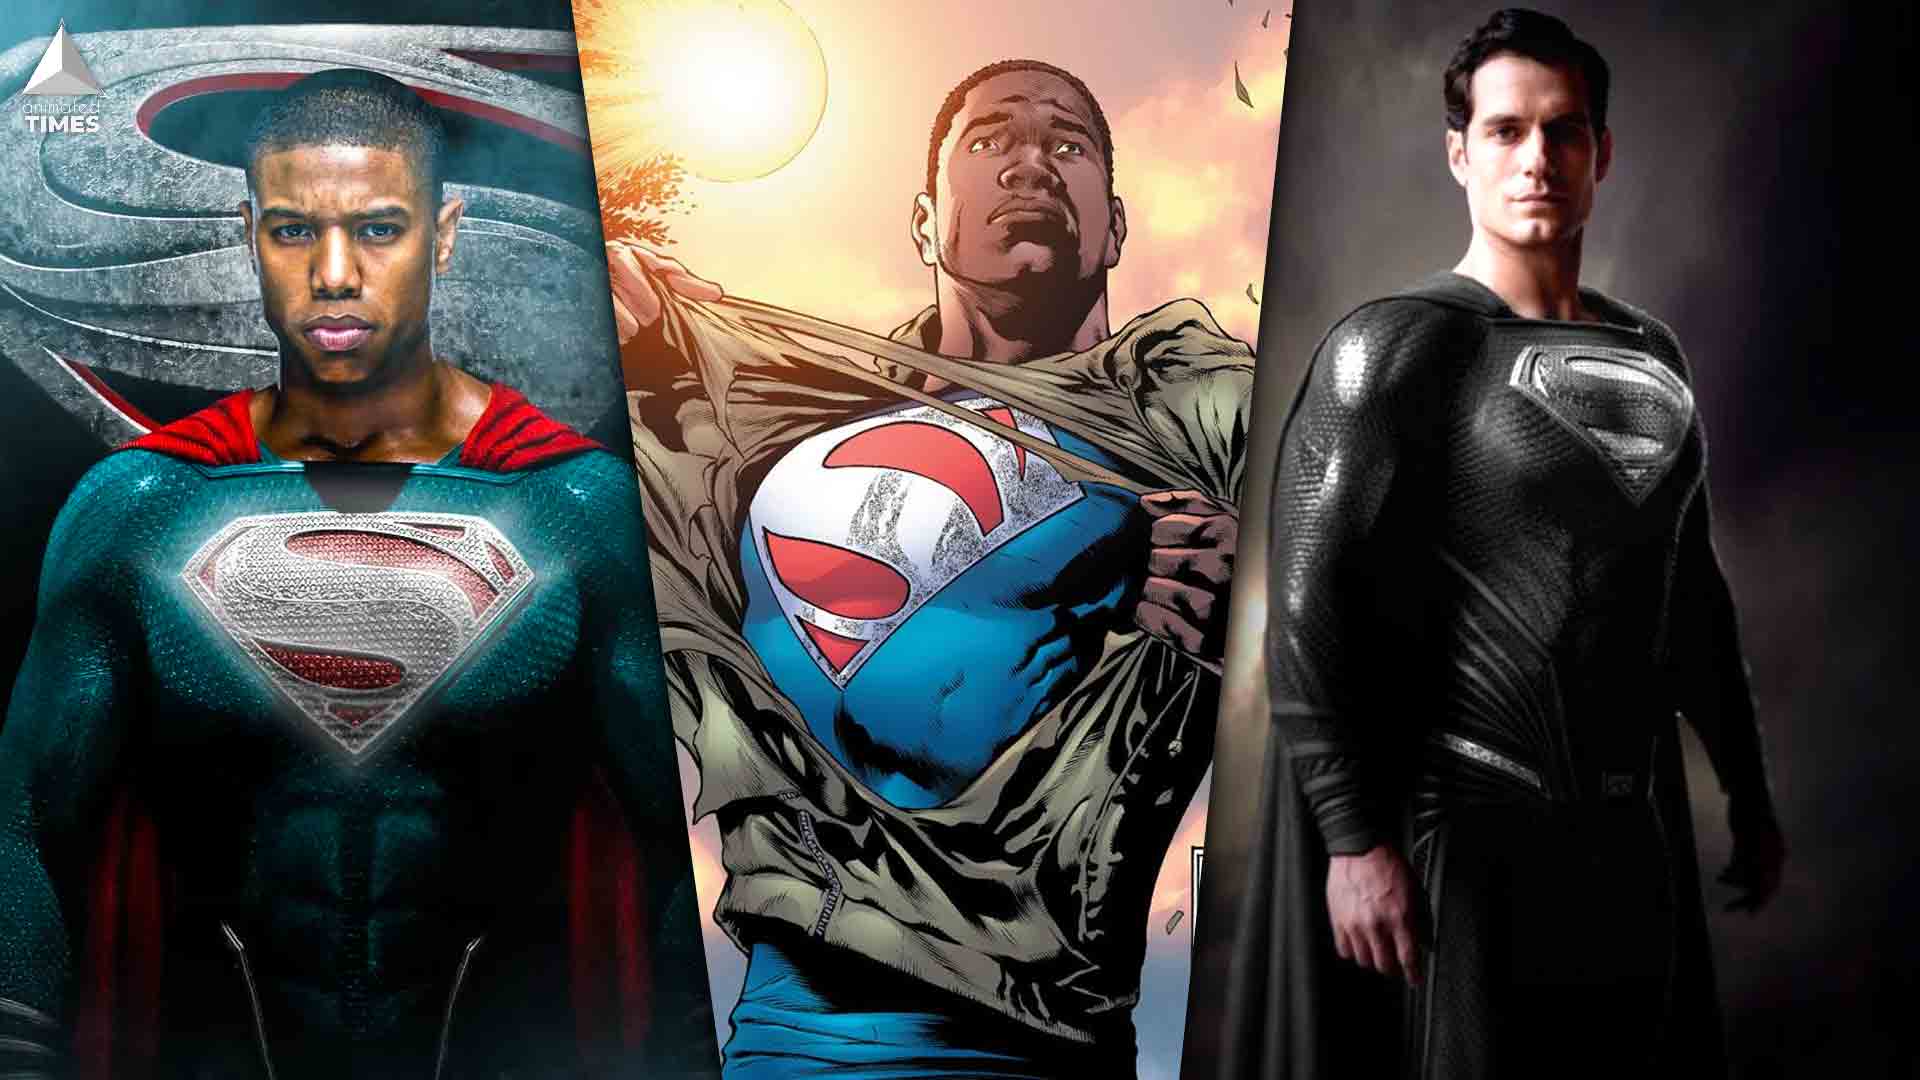 Will The New Superman Movie Have Krypton Origins? - Animated Times